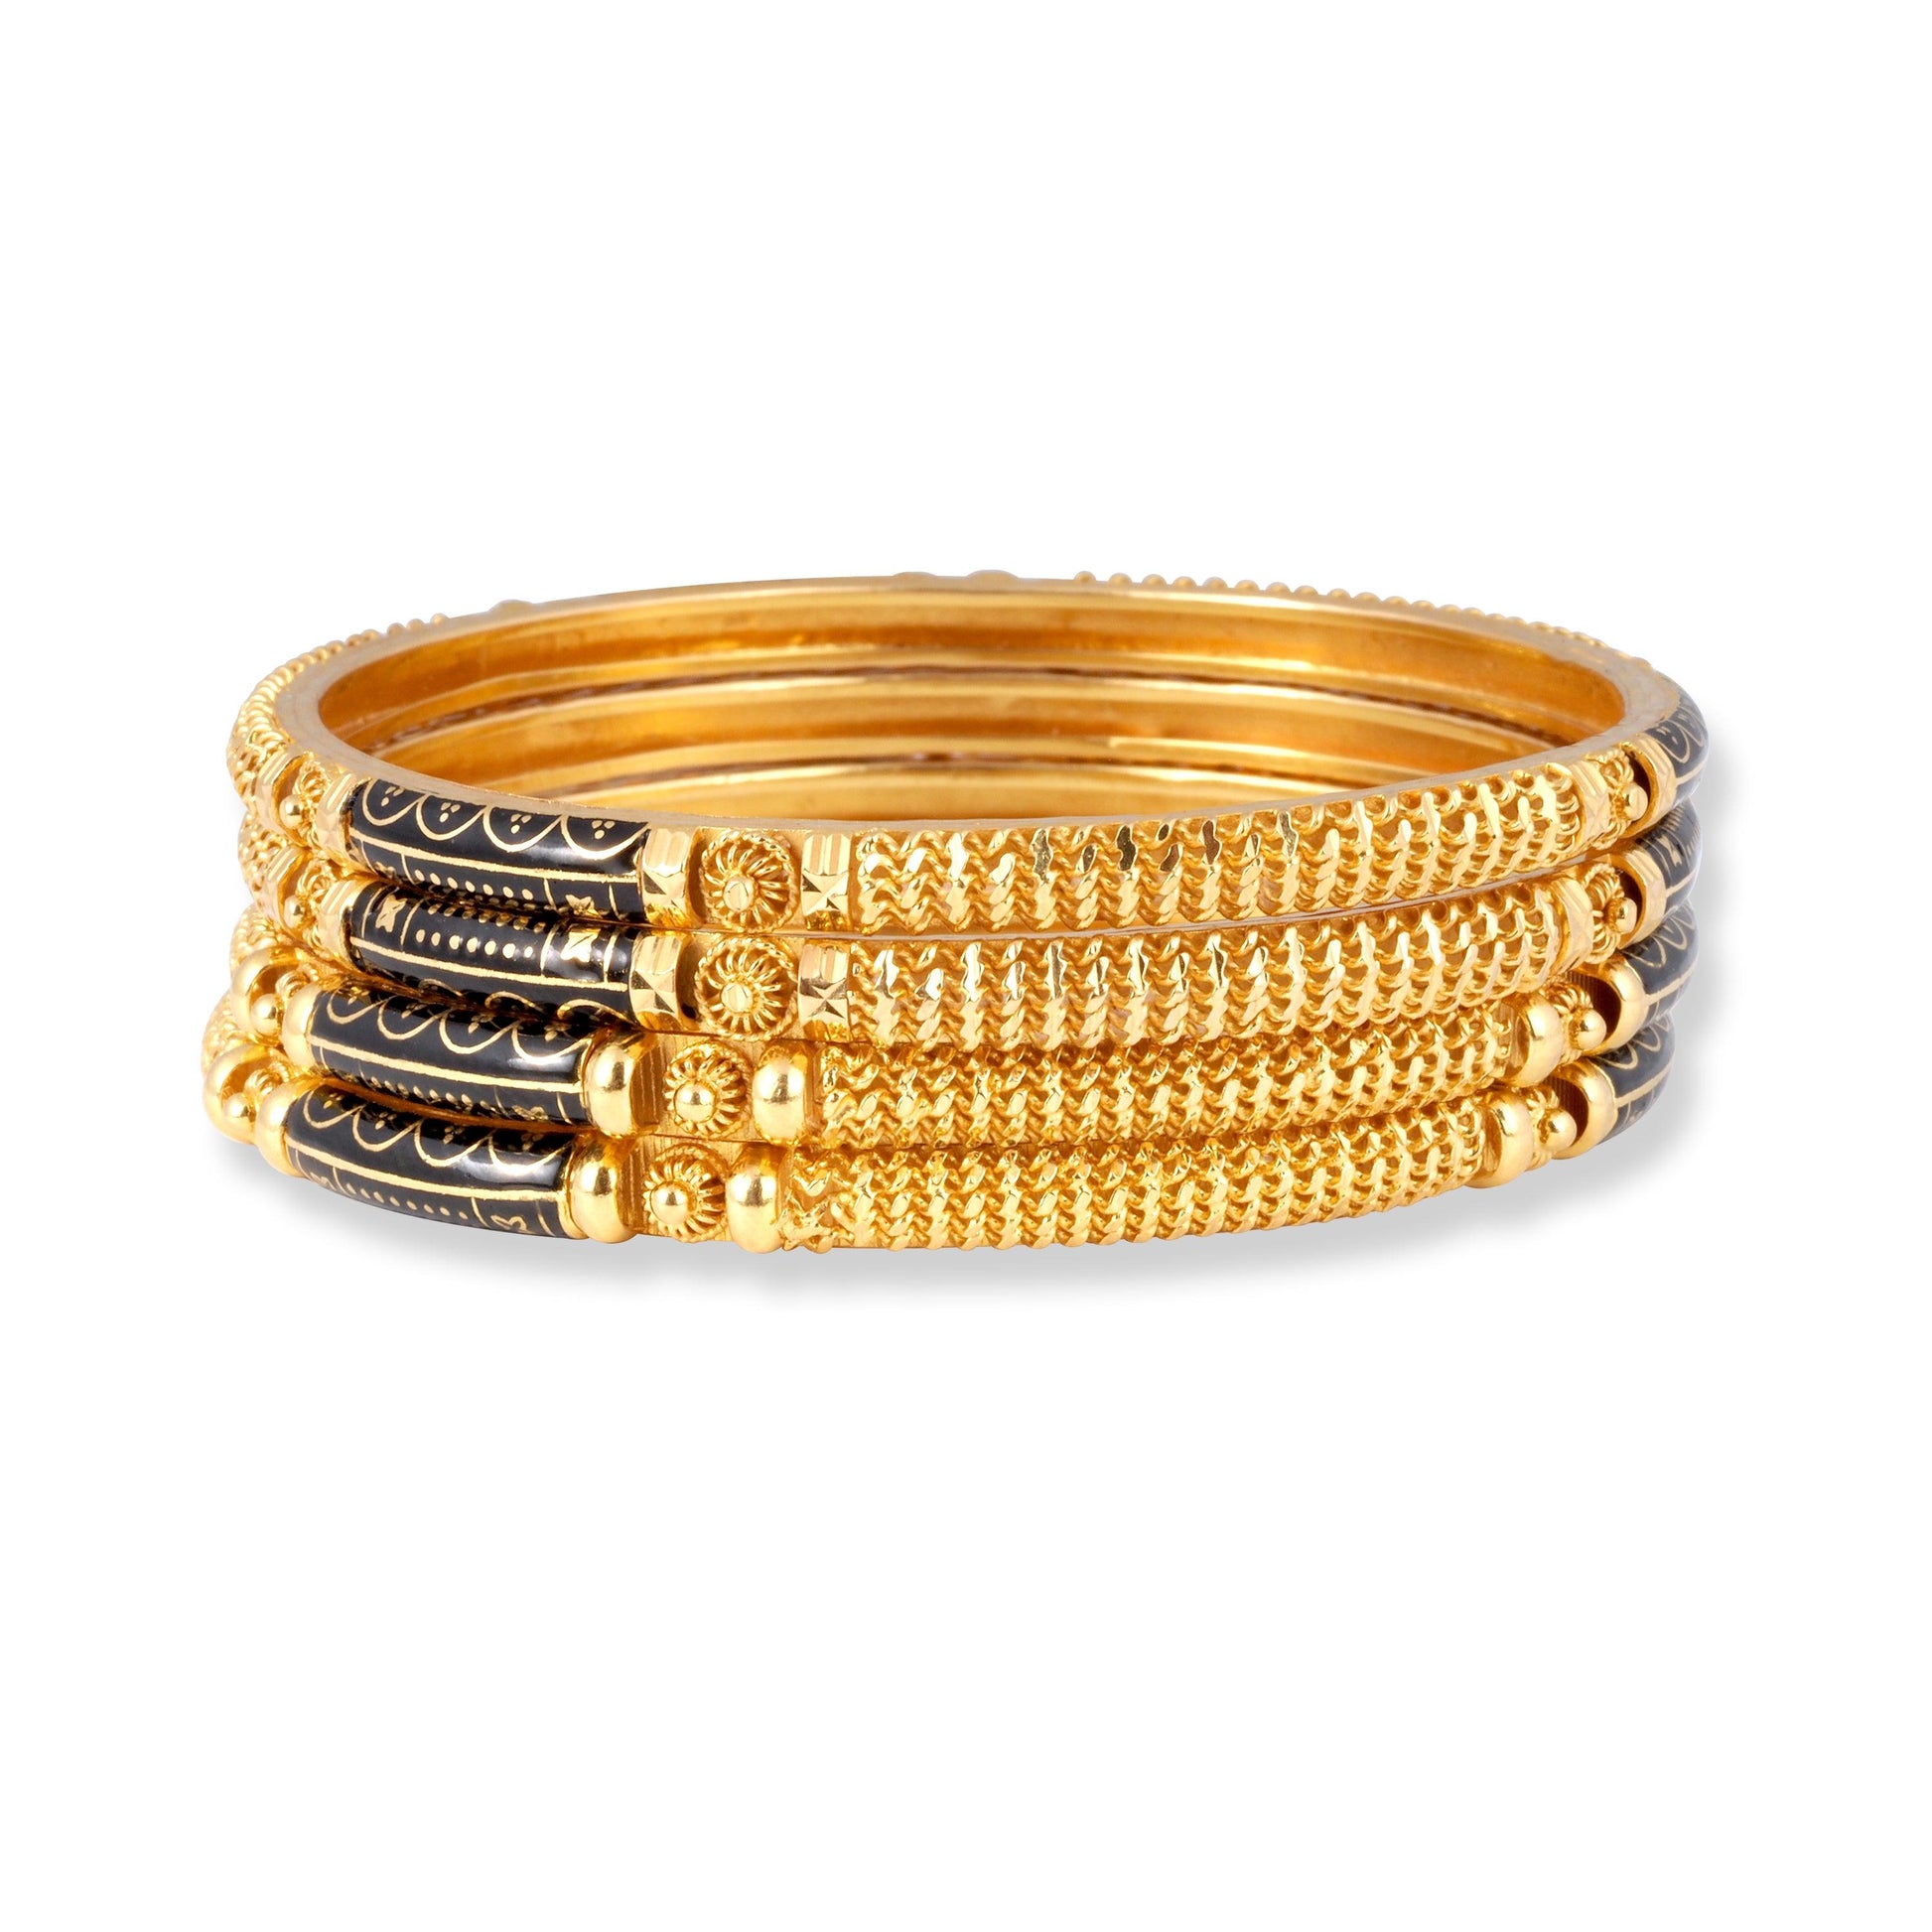 Set of Four 22ct Gold Bangles with Black Rhodium Plating B-8579 - Minar Jewellers